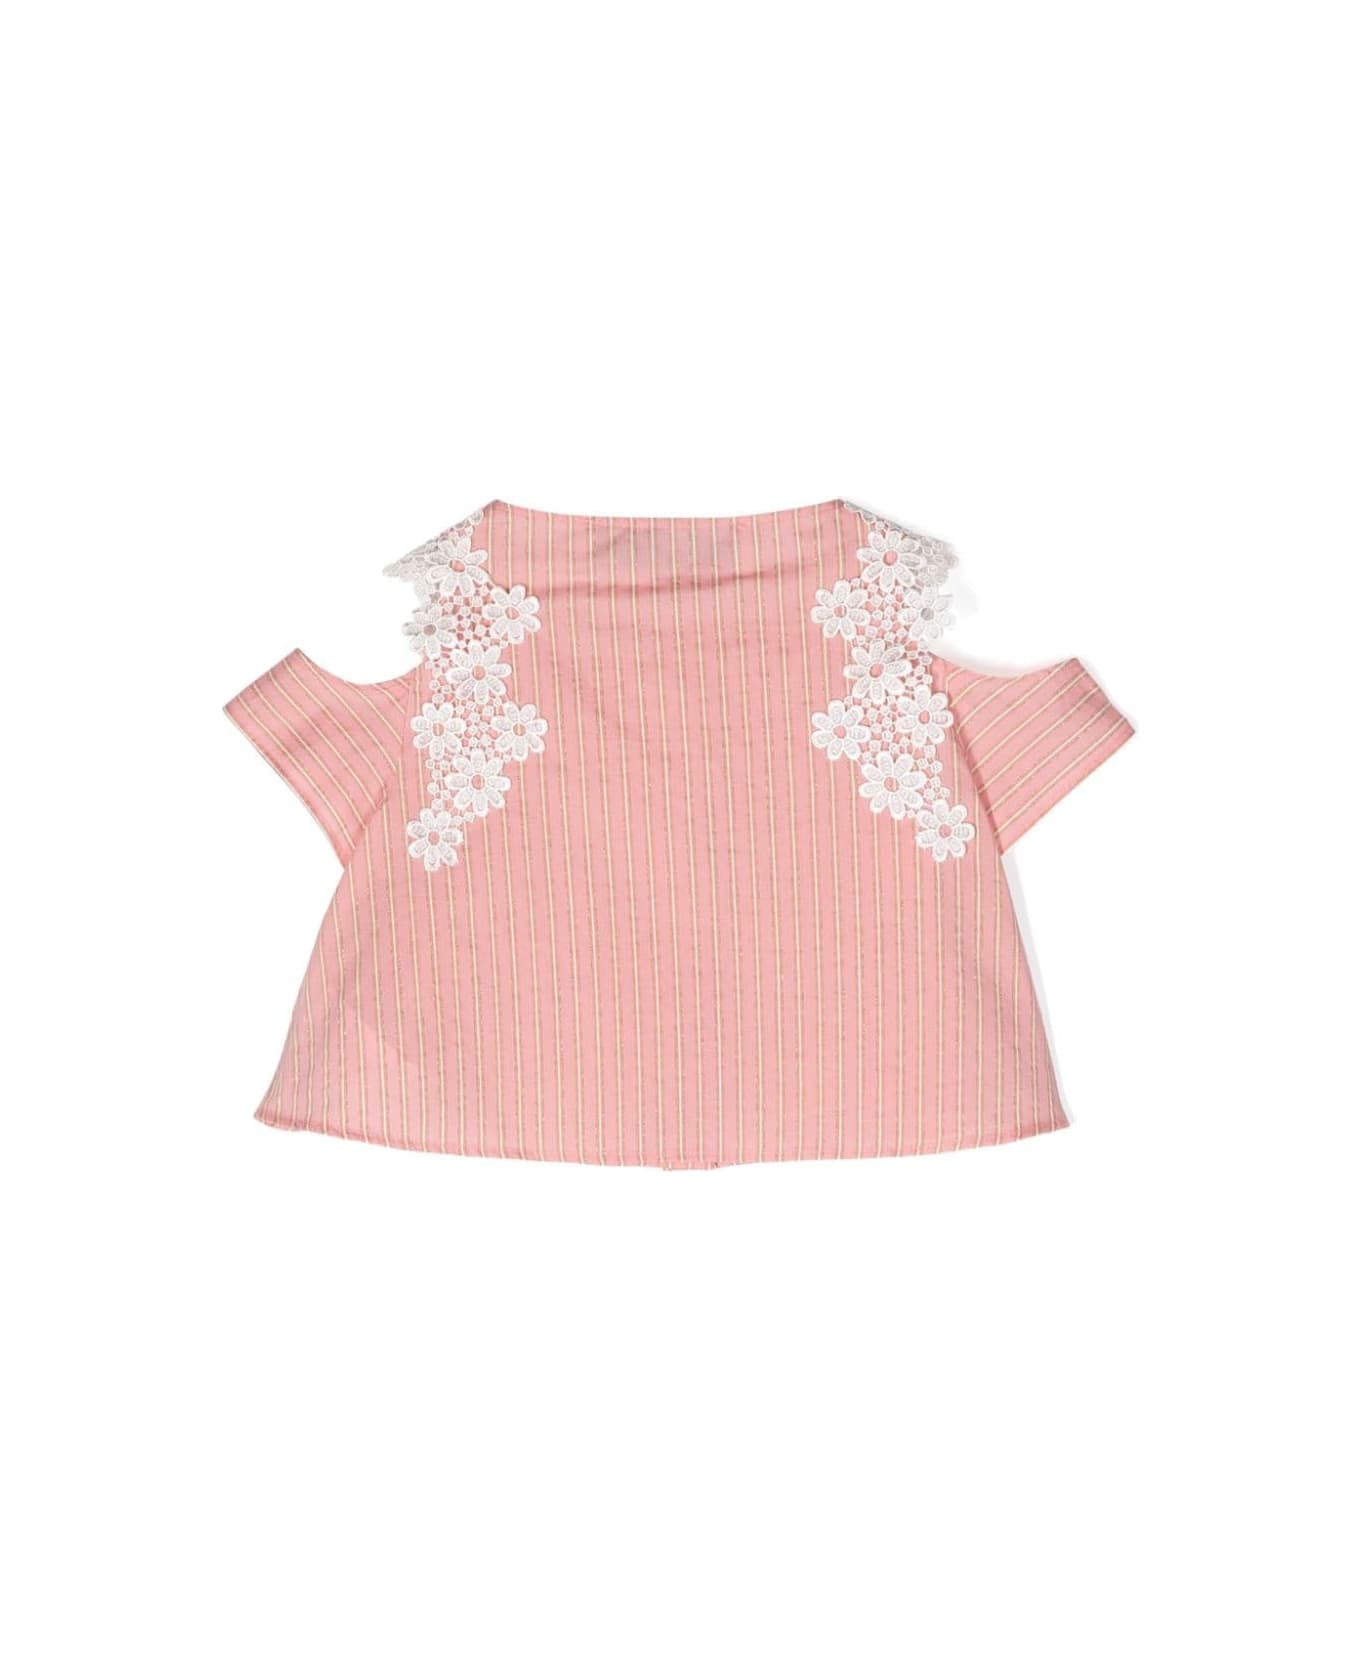 Simonetta Pink Lamé Striped Shirt With Lace - Pink シャツ